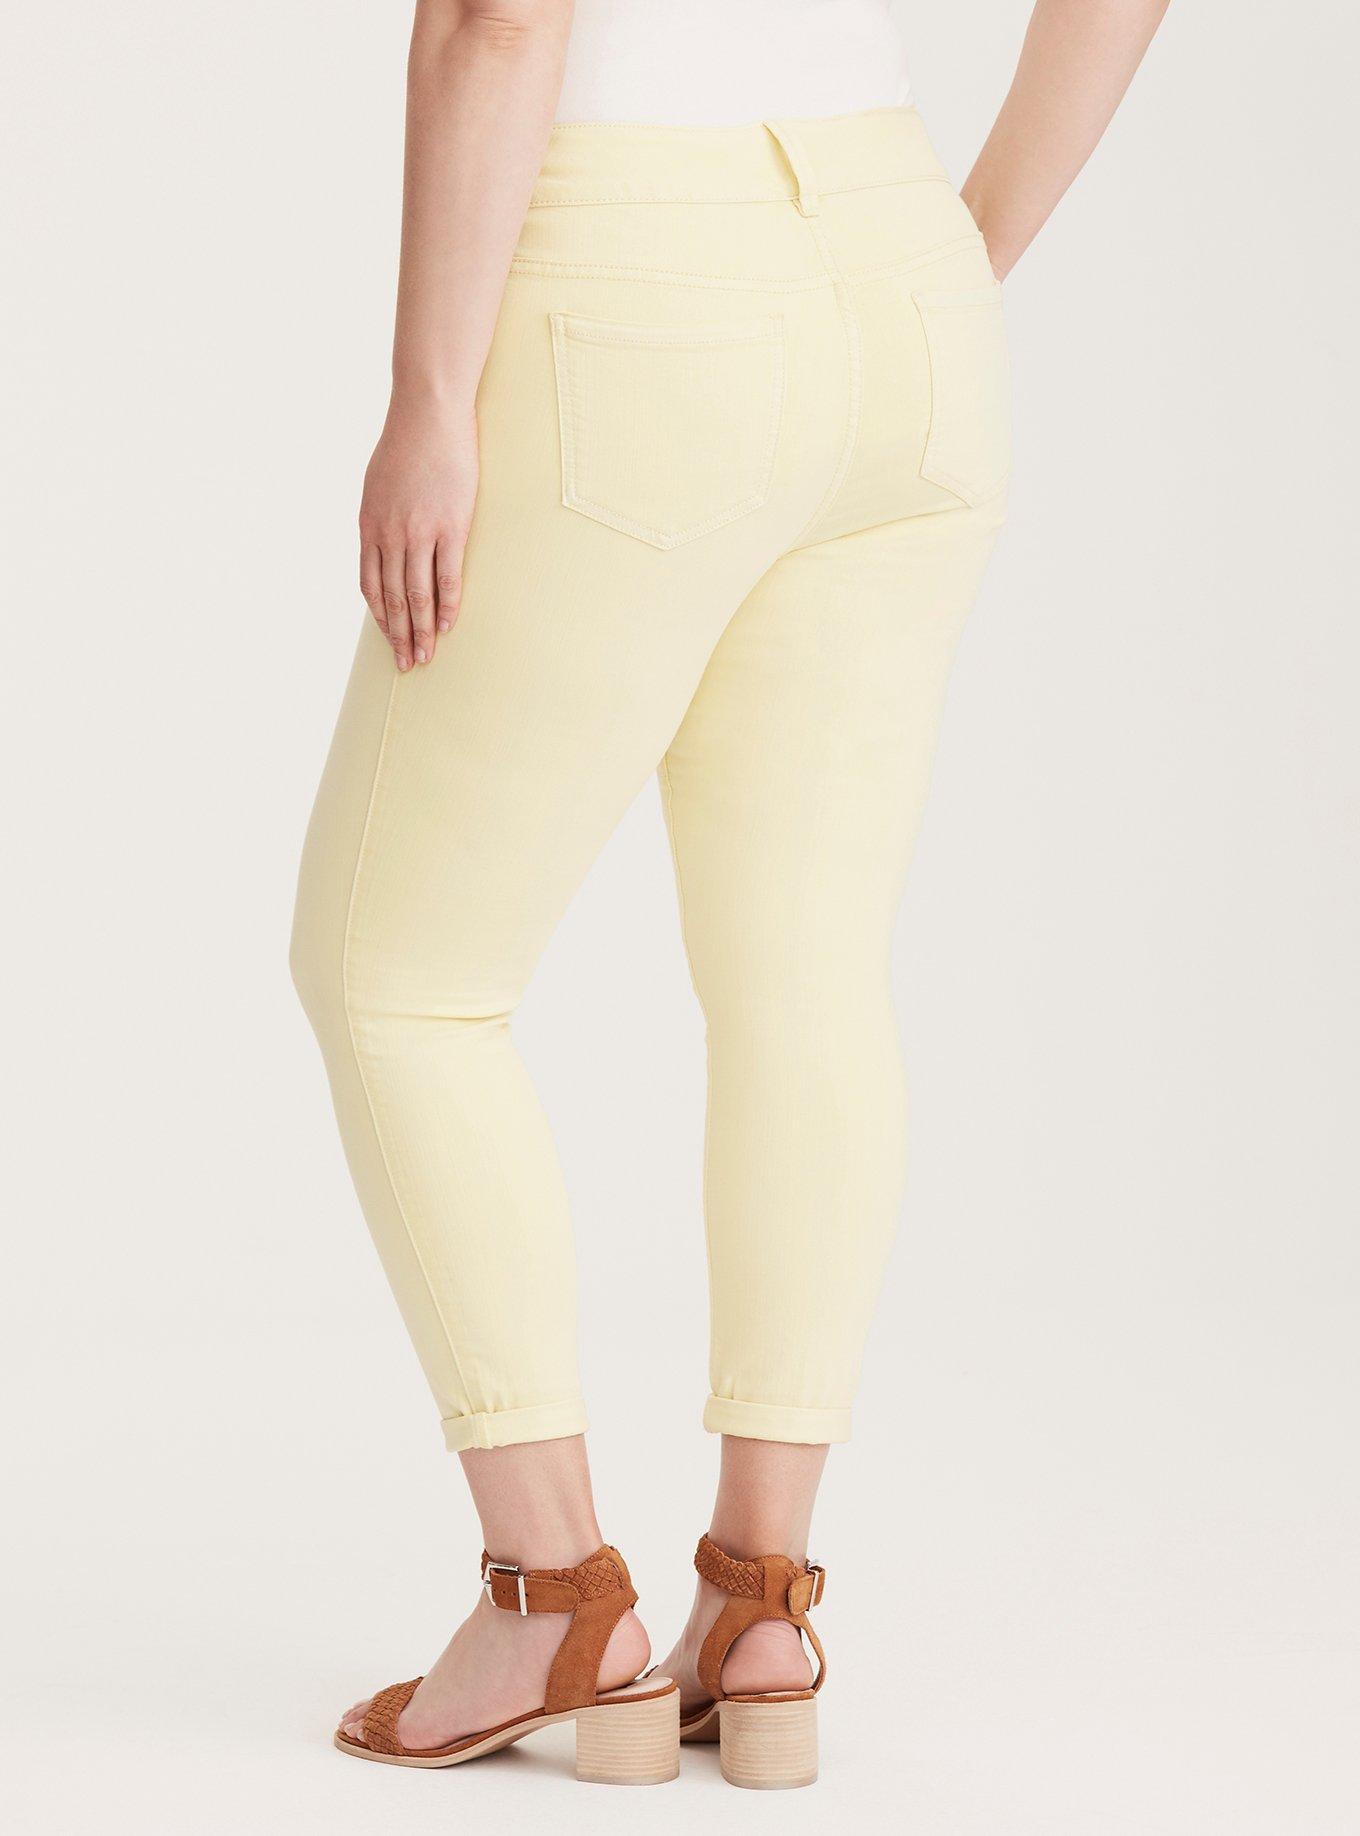 Plus Size - Torrid Cropped Jeggings - Faded Yellow Wash - Torrid